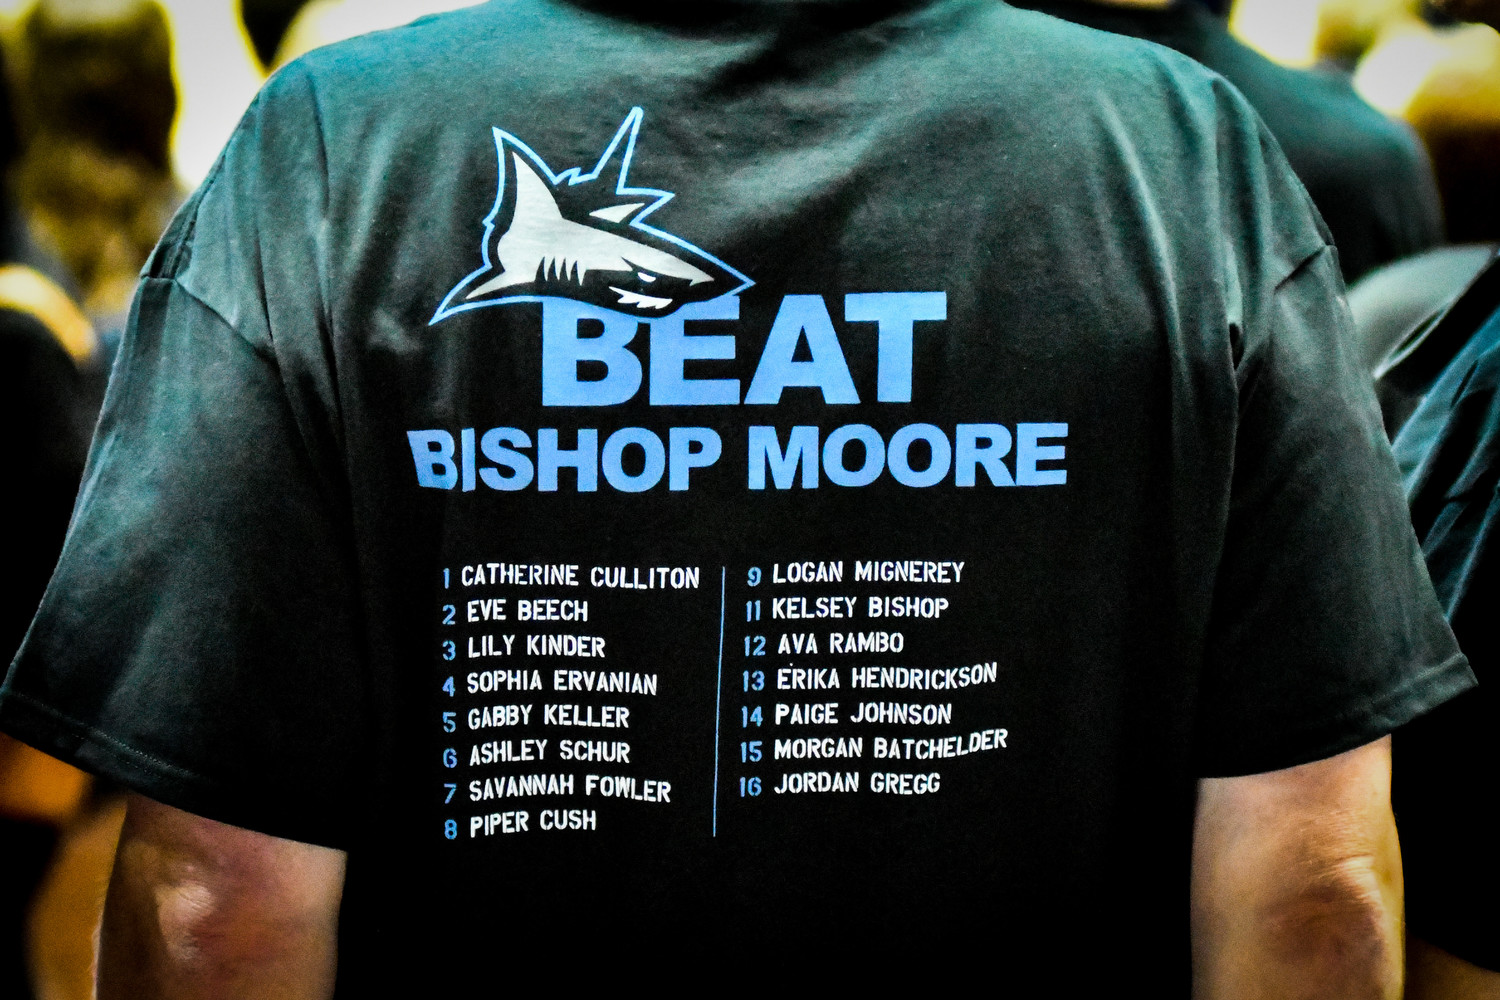 Ponte Vedra fans sport their “Beat Bishop Moore” T-Shirts at the state championship match.